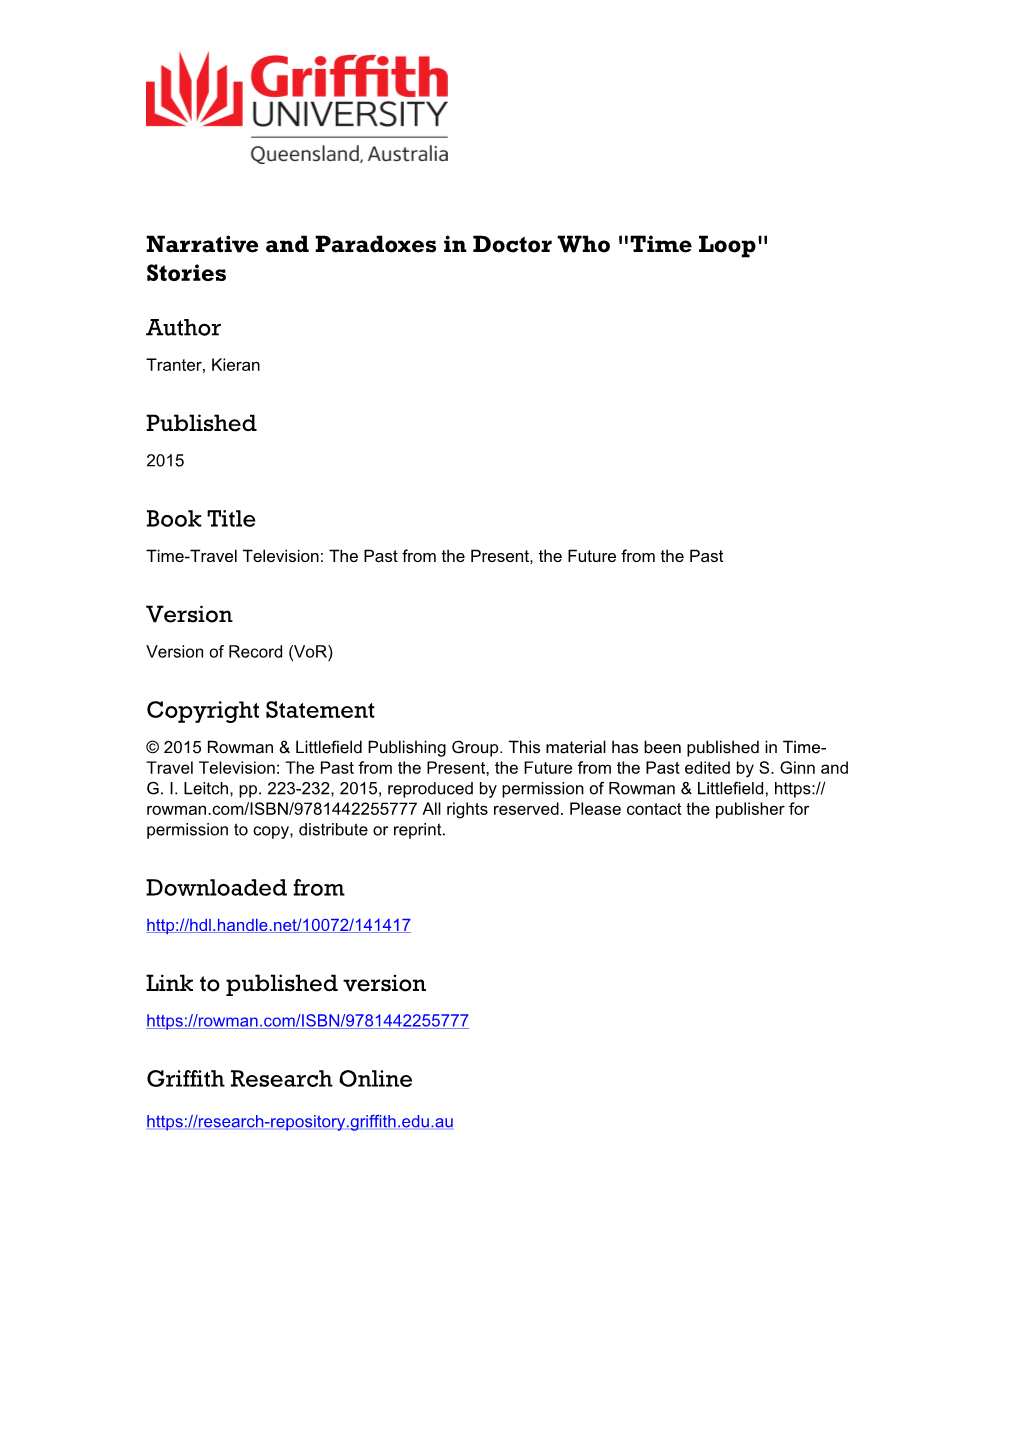 Narrative and Paradoxes in Doctor Who "Time-Loop" Stories Kierantranter